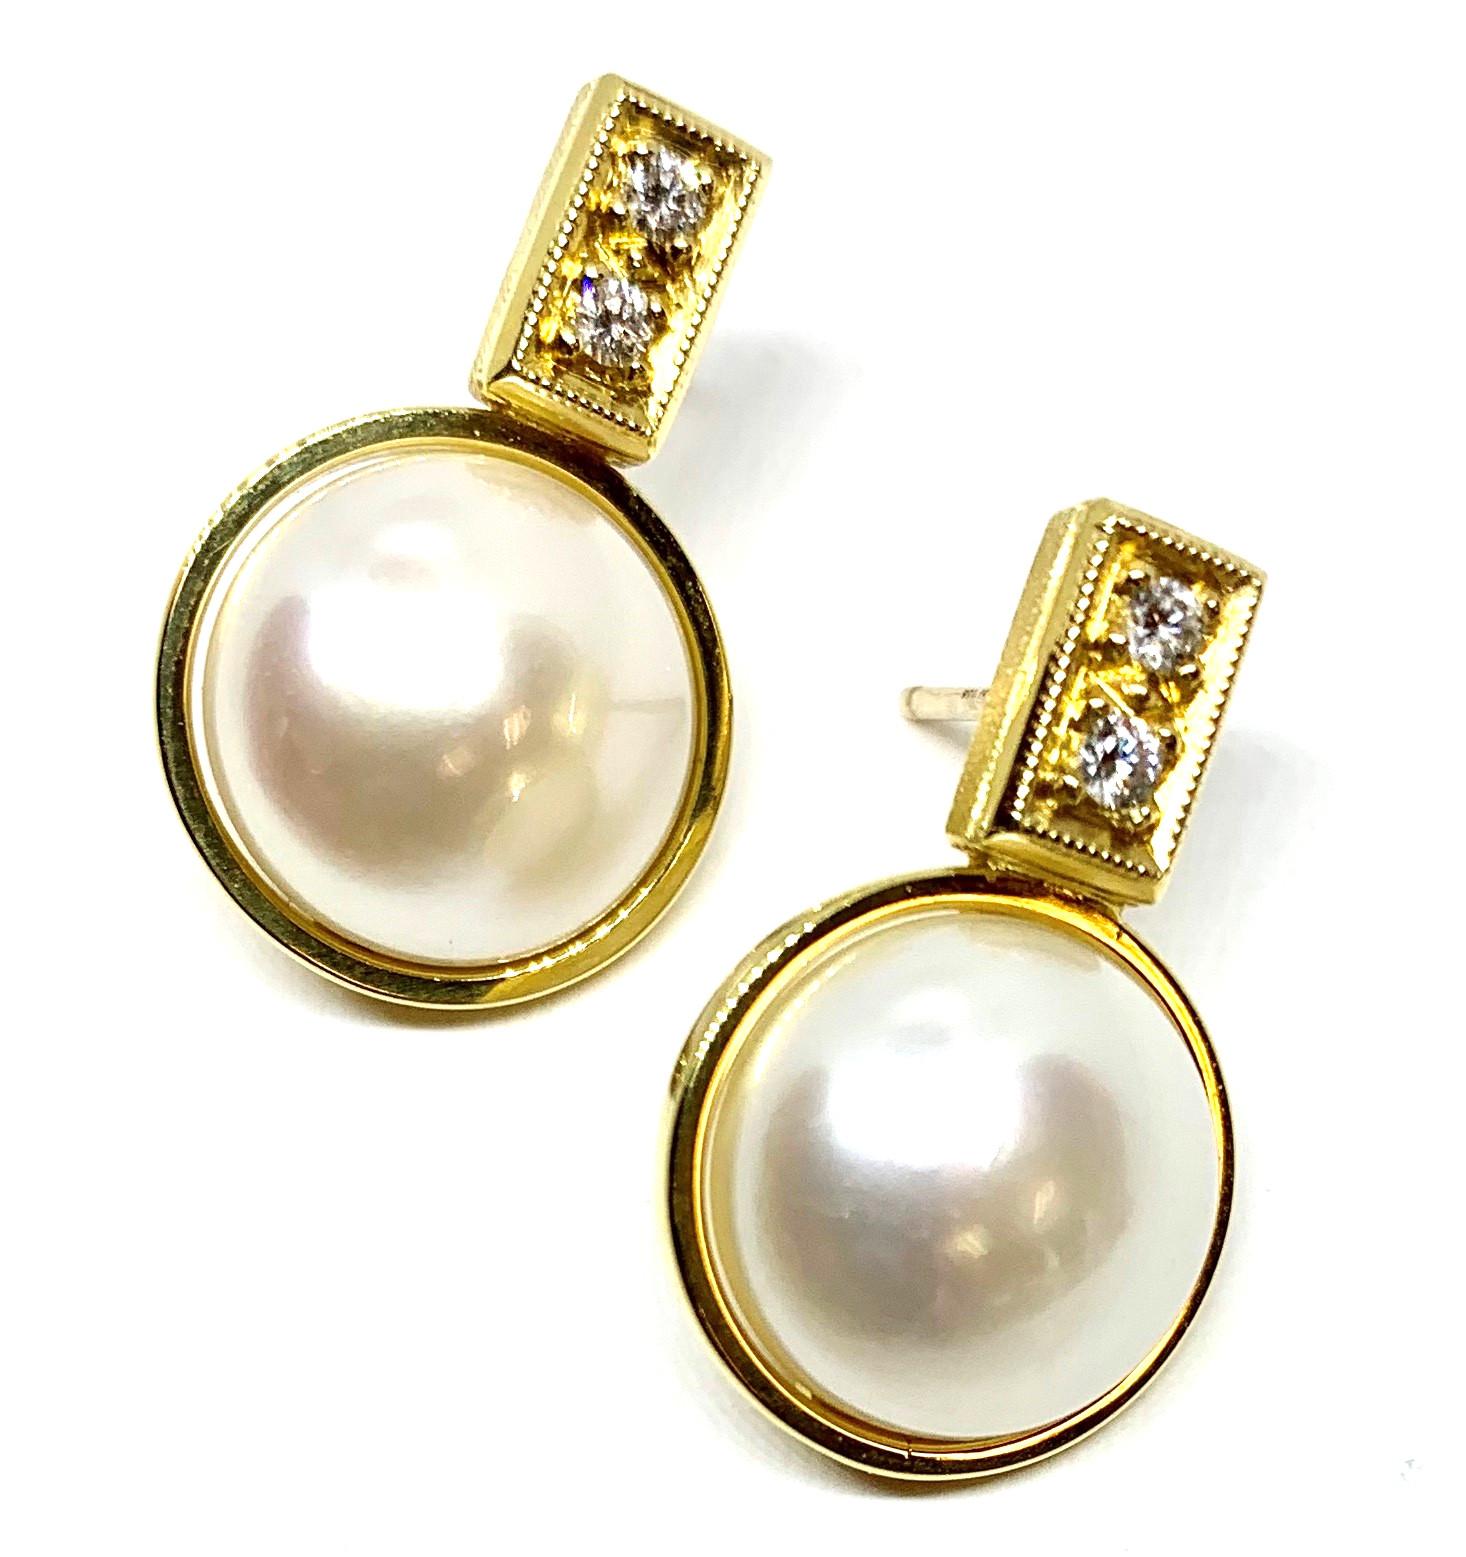 Two giant round button pearls are set in rich, 18k yellow gold bezels accented by diamonds in these beautiful drop earrings. The pearls are large with gorgeous luster ... and pearls go with just about everything! We designed these earrings to nestle